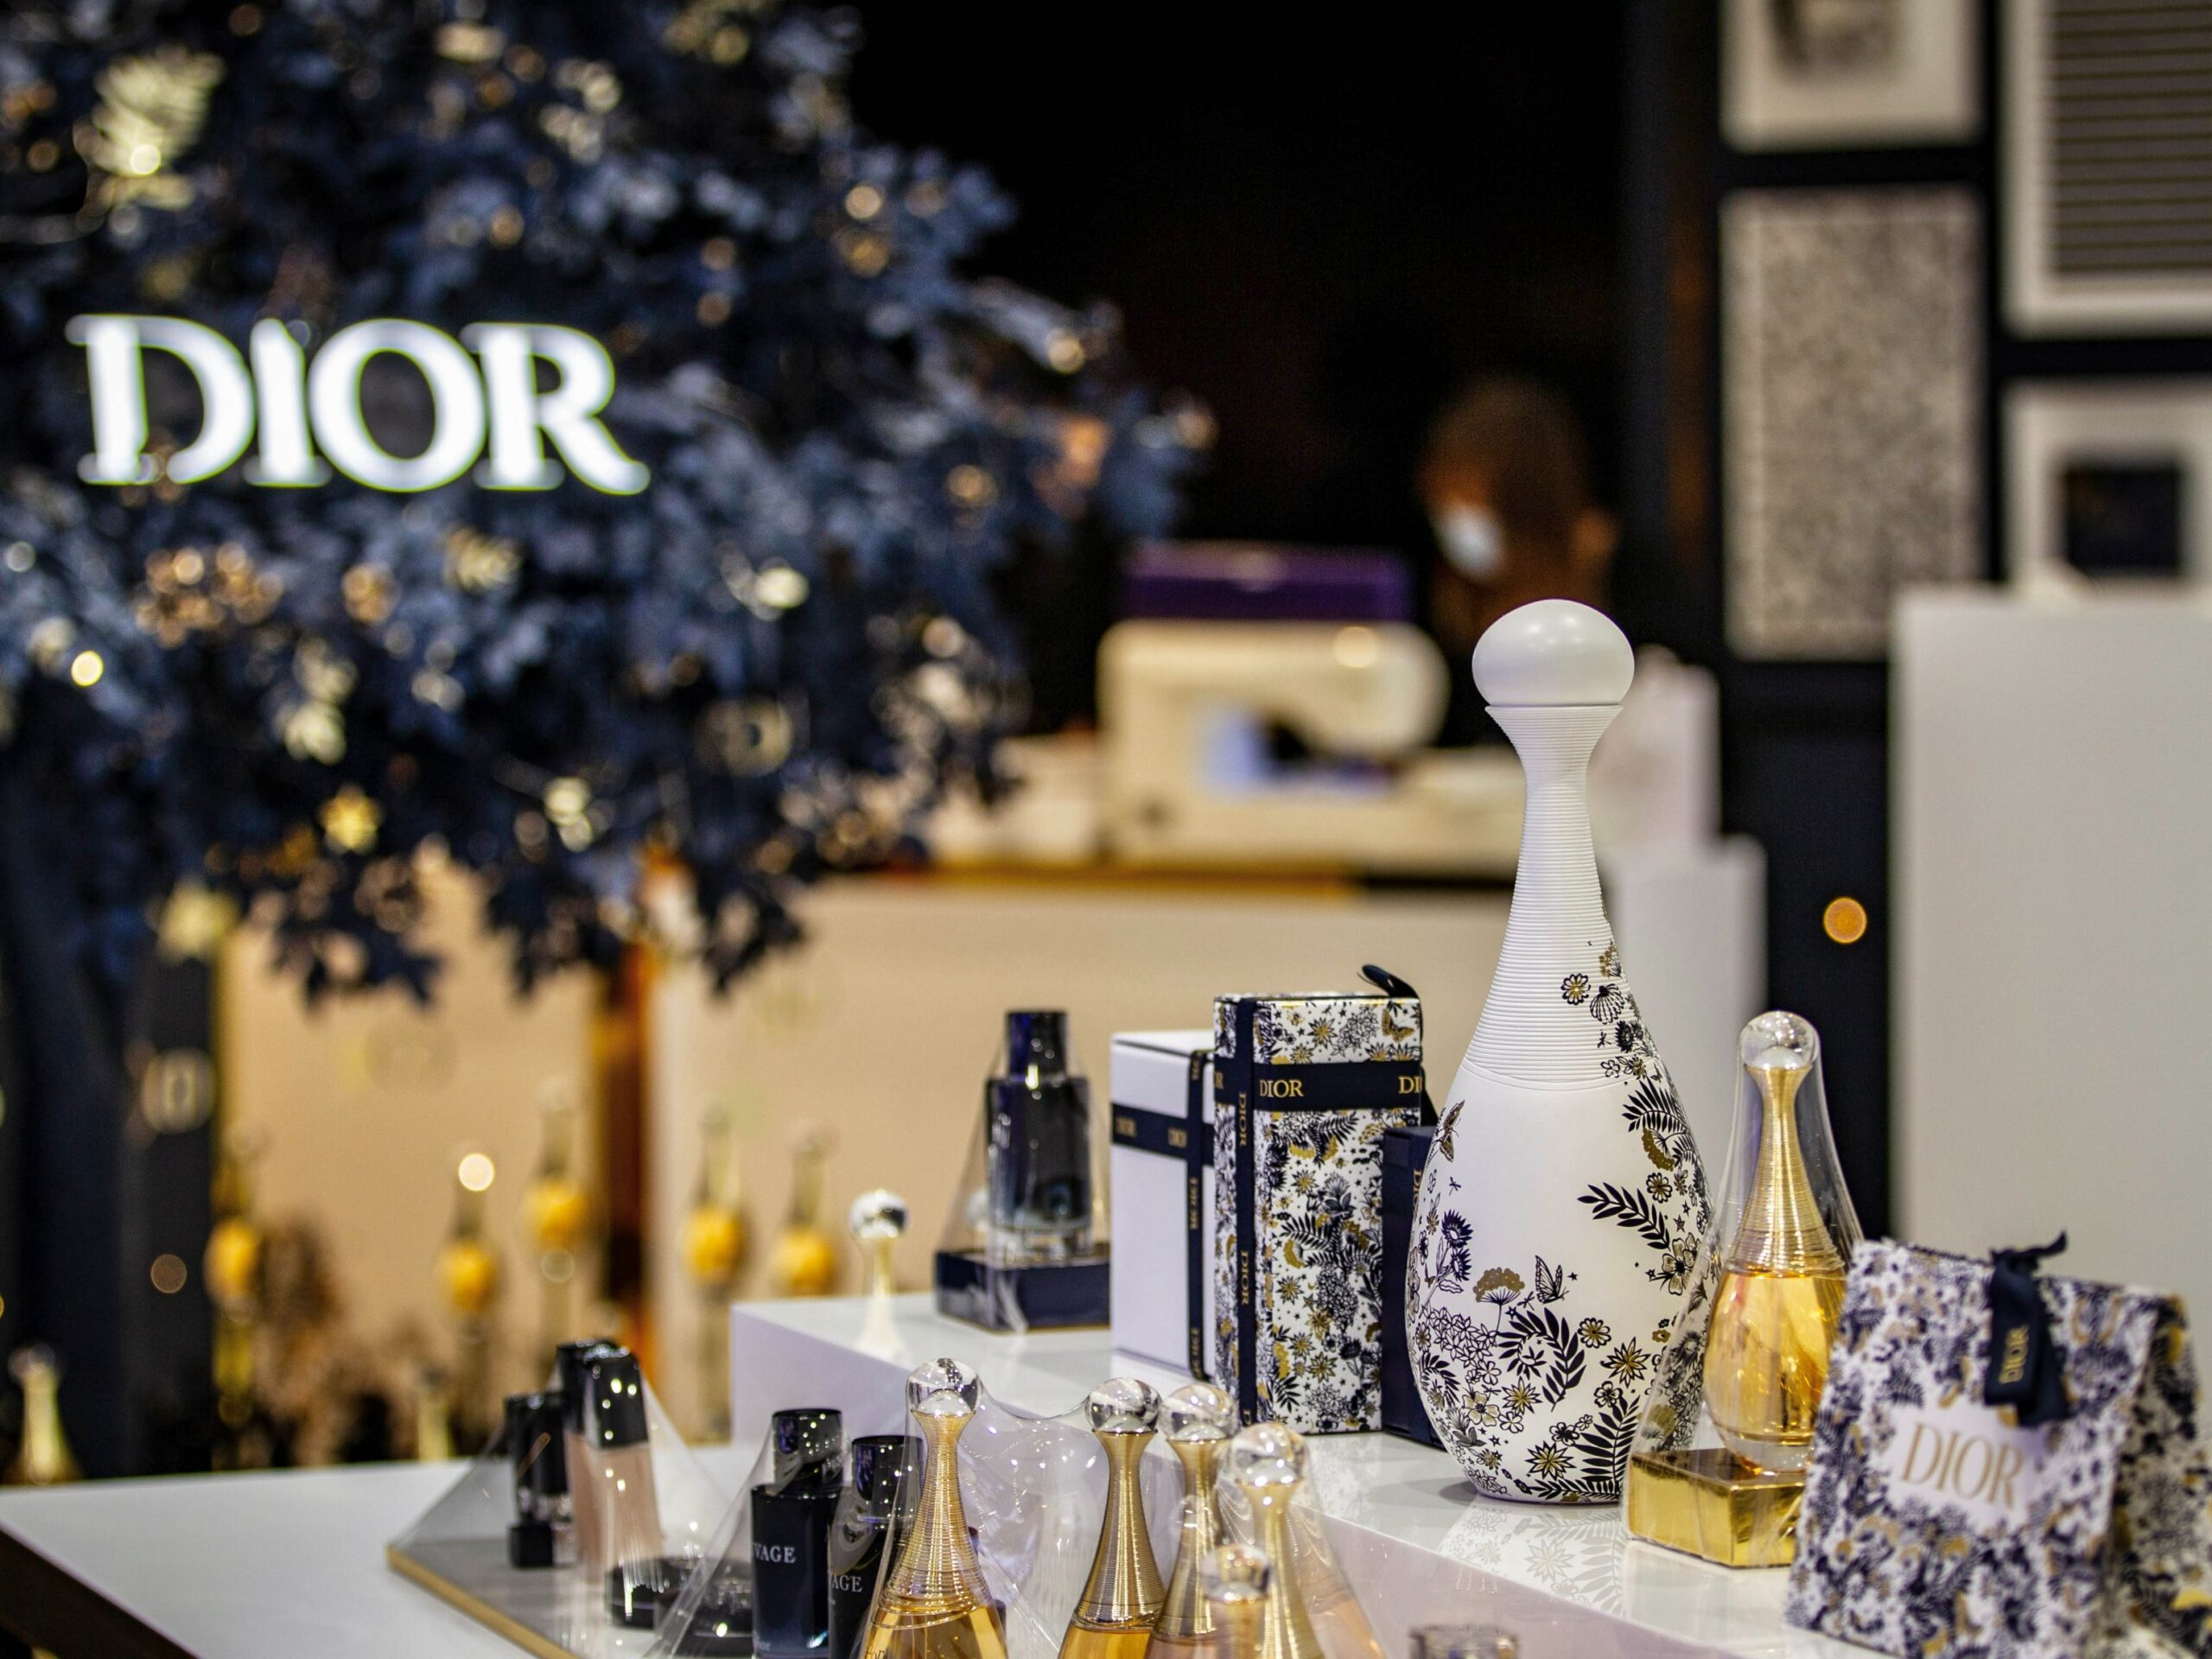 Dior 'The Atelier of Dreams', Brand Activation